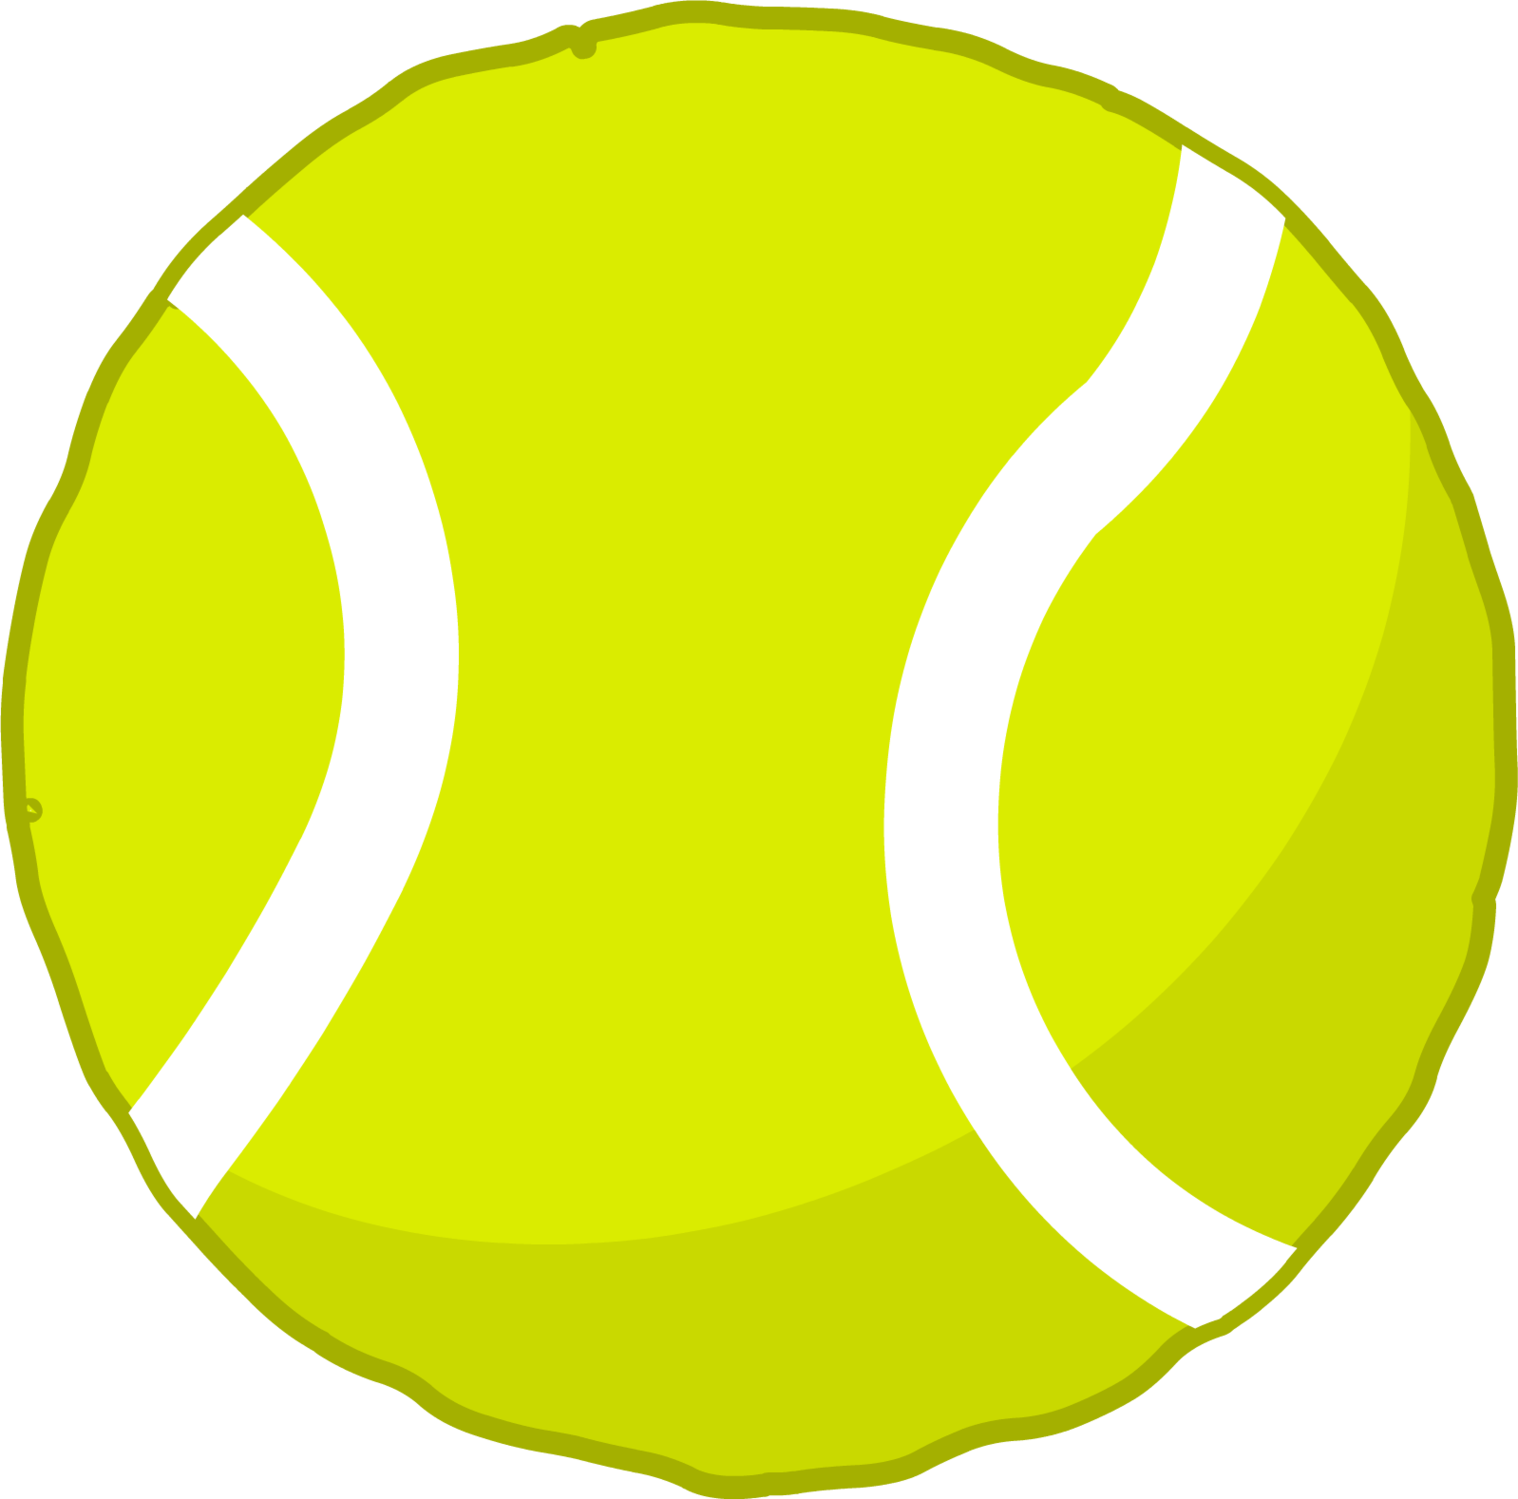 Picture Of Tennis Ball To Use Resource Clipart